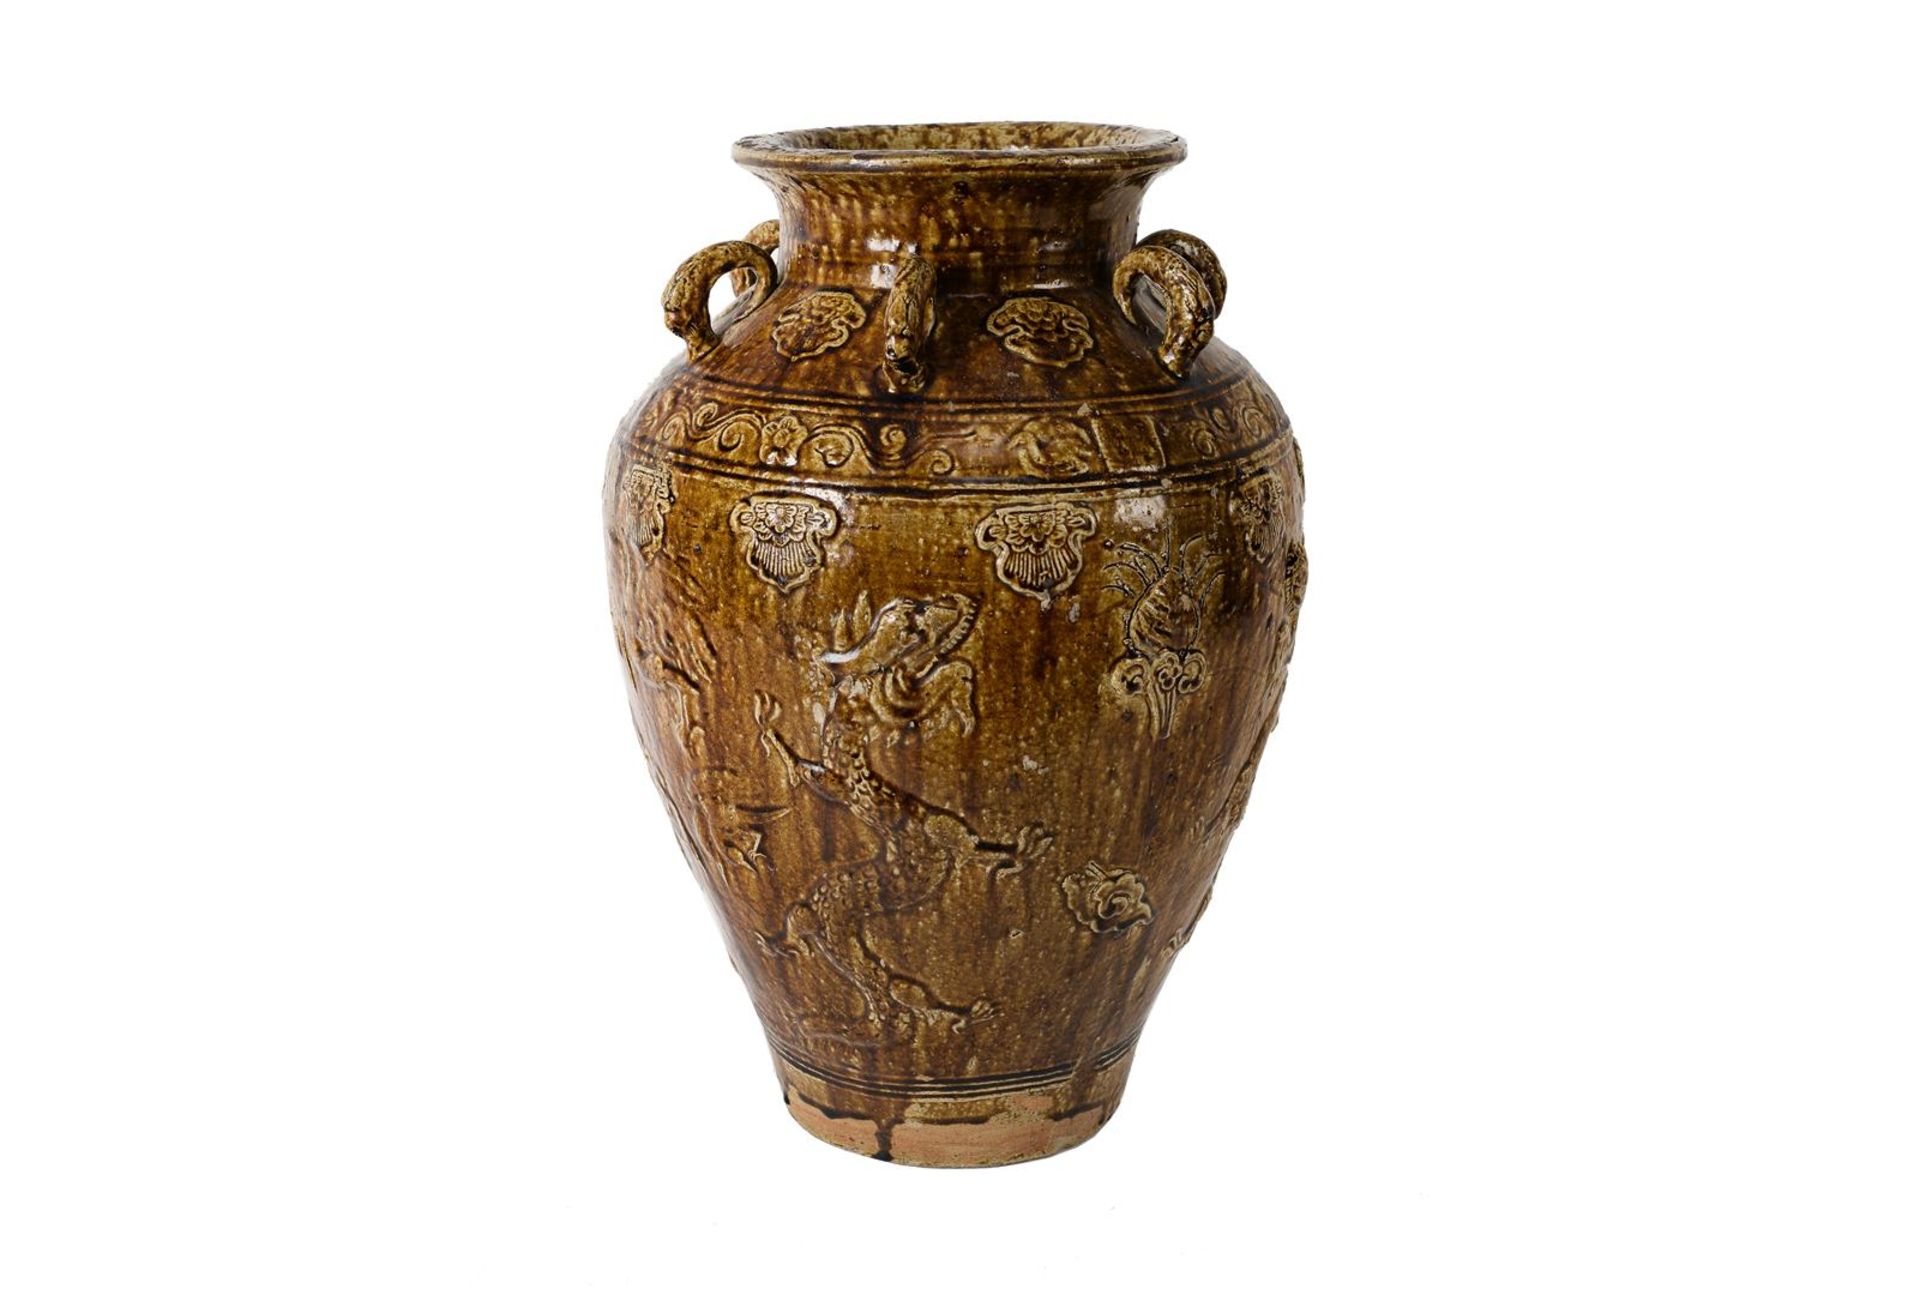 A glazed pottery martaban jar with six rings, decorated in relief with dragons and flowers.